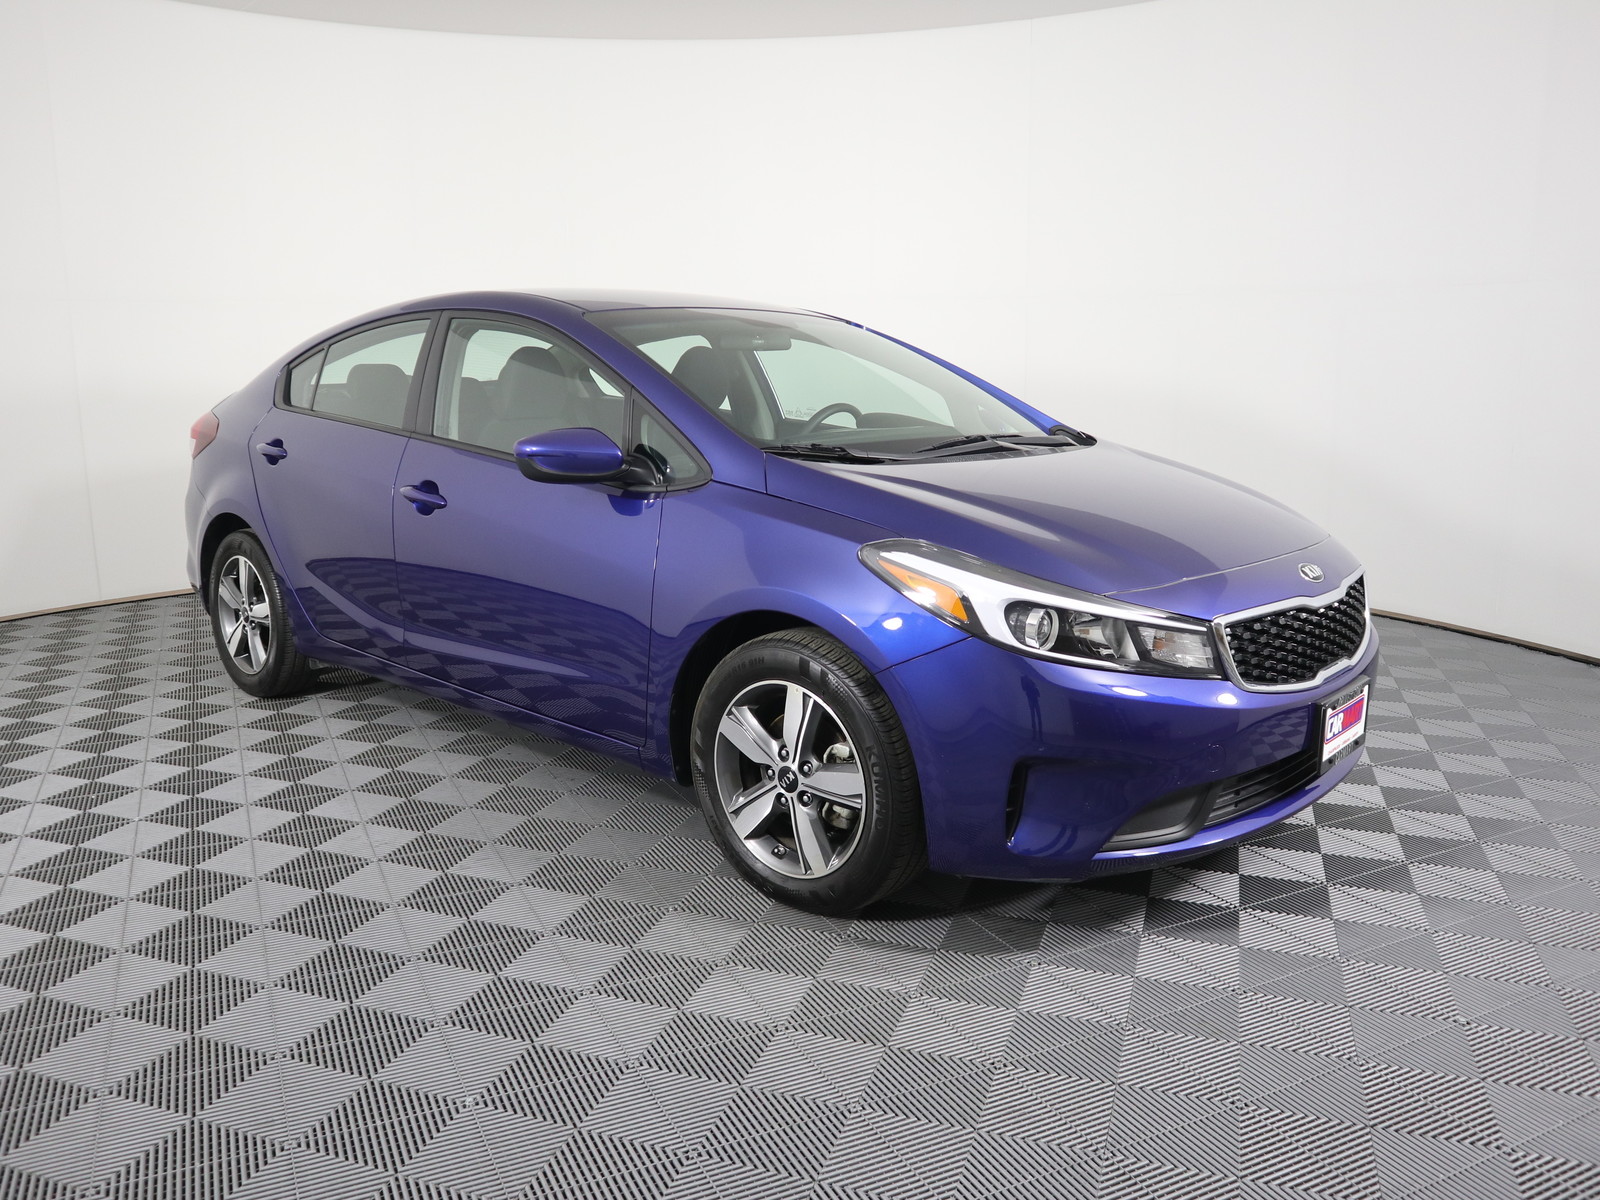 Pre-Owned 2018 Kia Forte LX Auto 4dr Car in Savoy #T01055 | Drive217